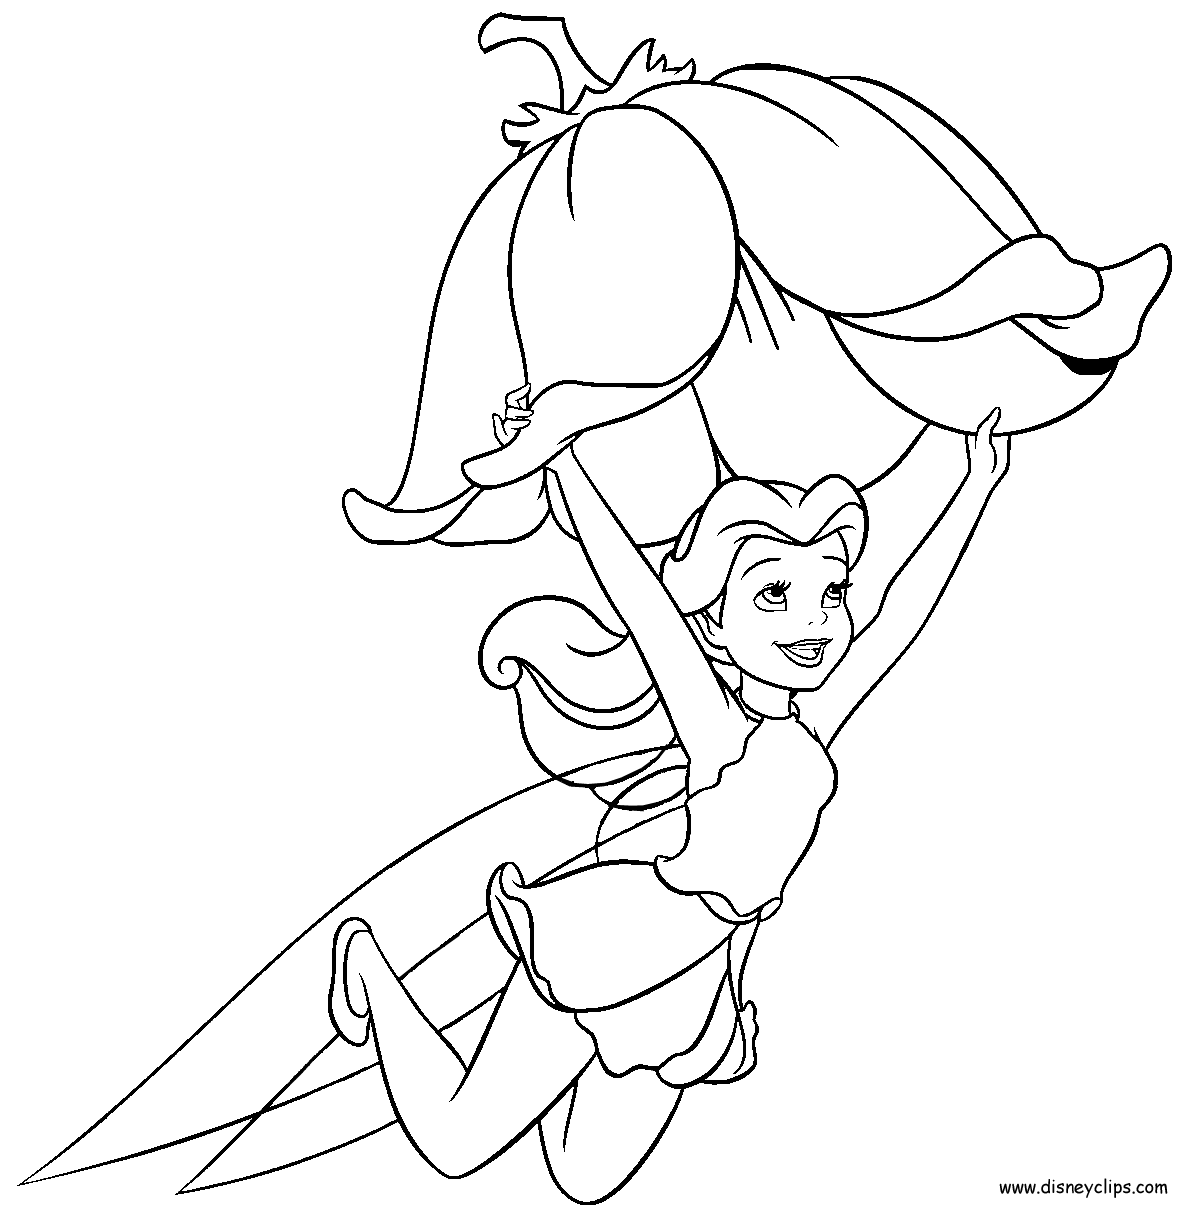 Disney Fairies Coloring Pages To Print For Free : Disney fairy